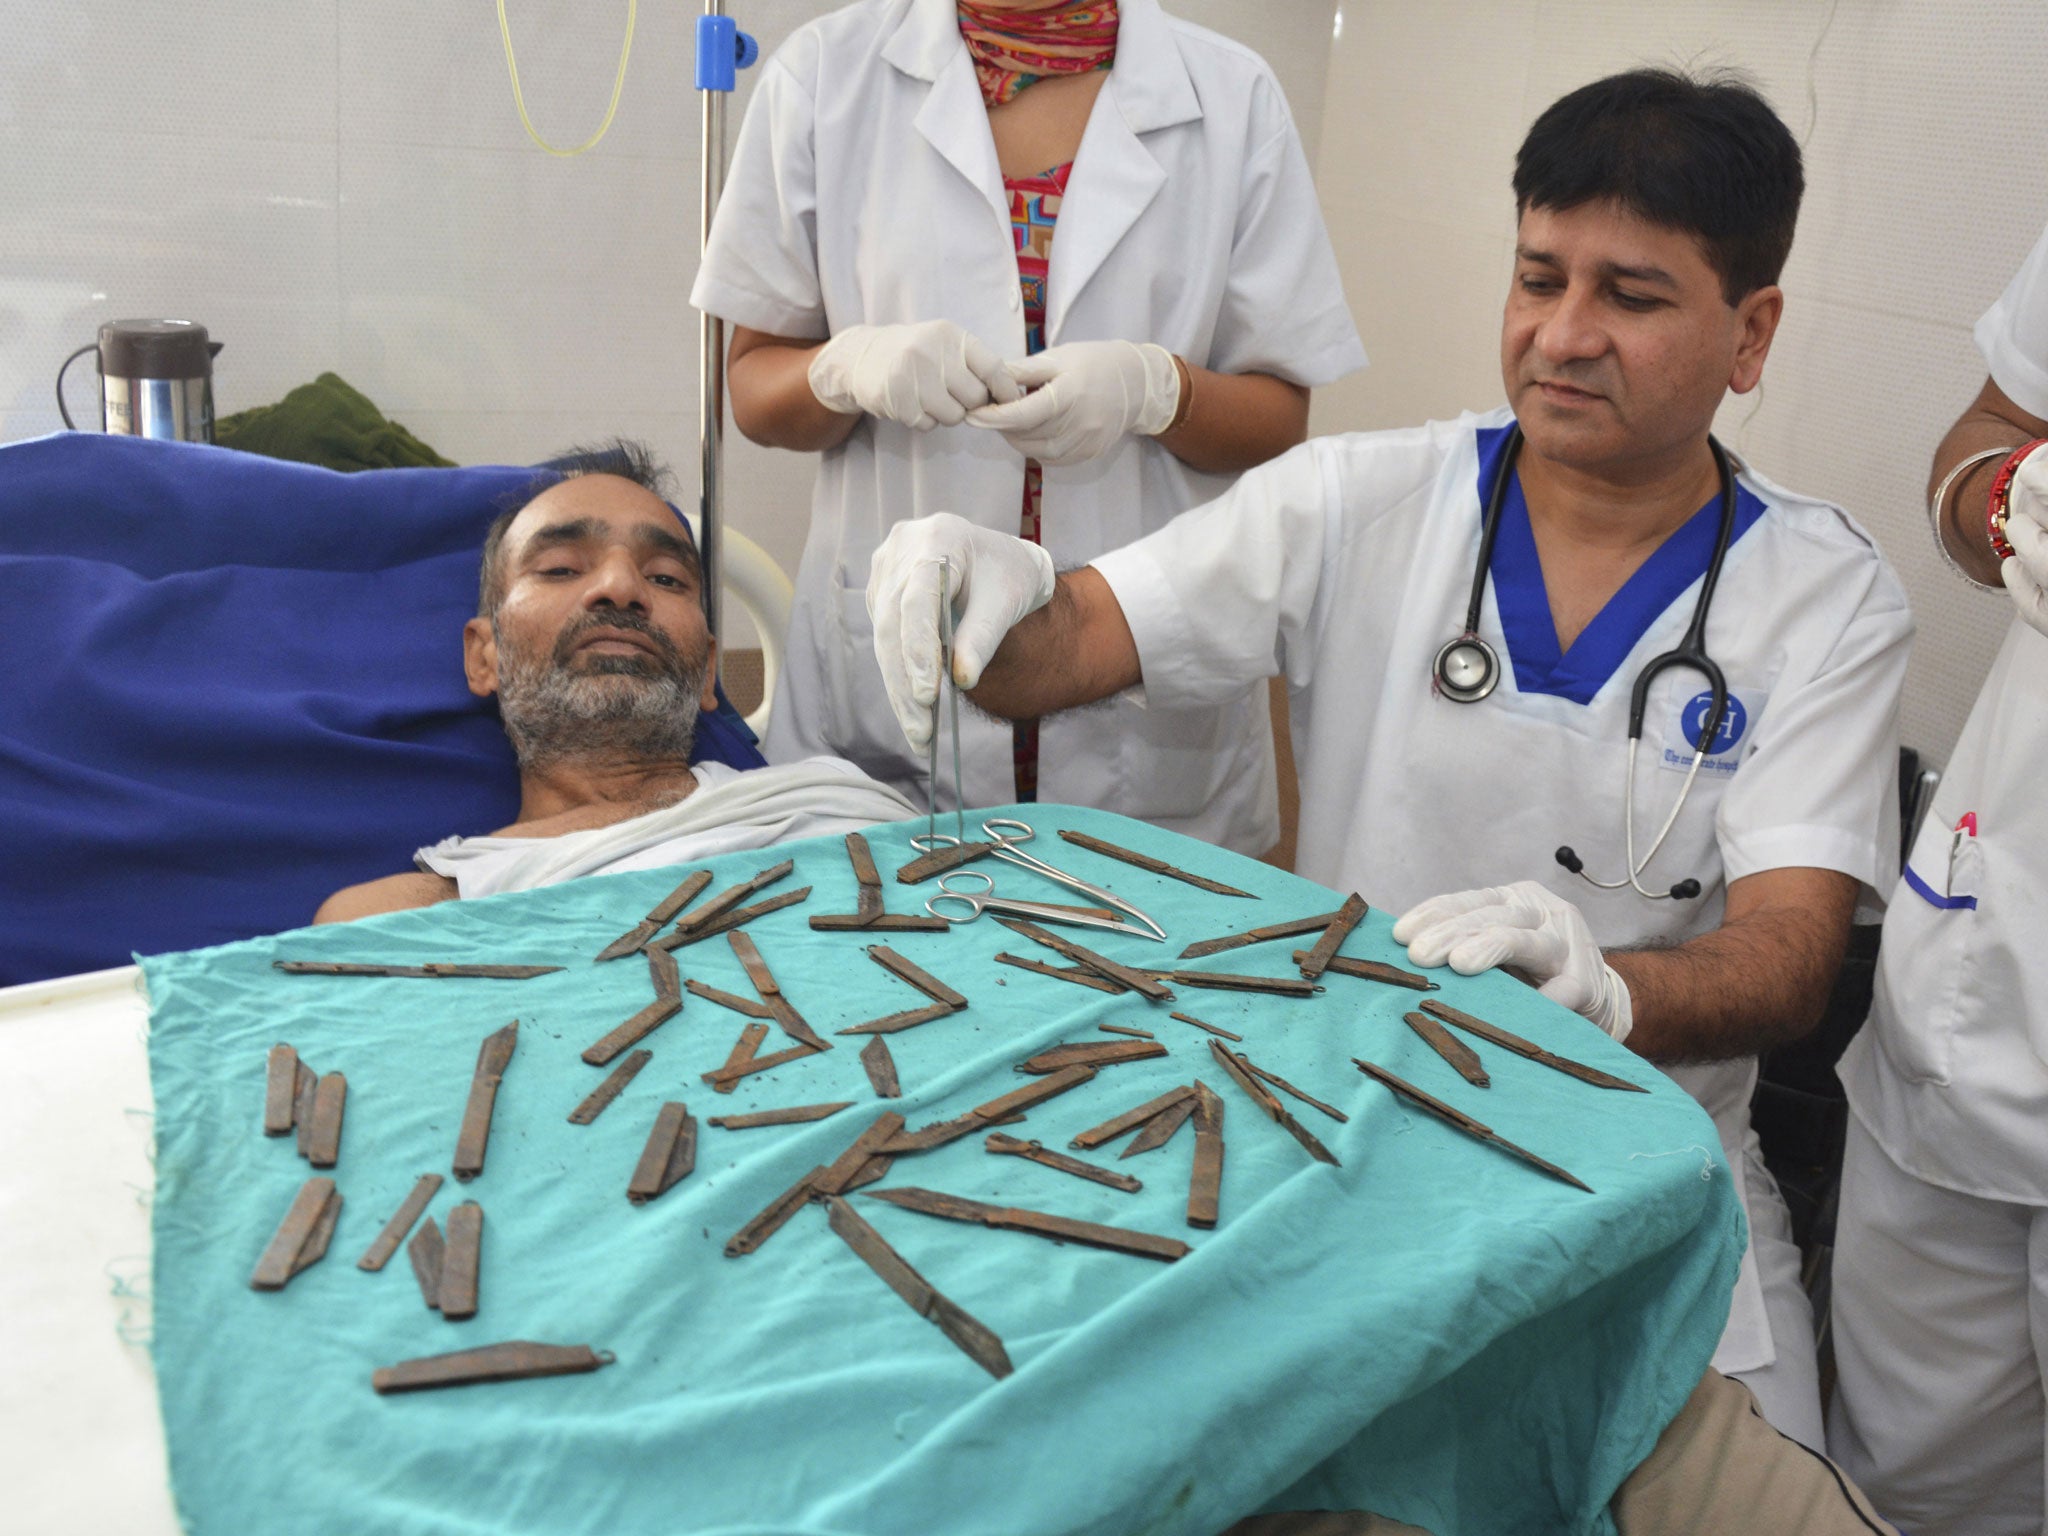 Jatinder Malhotra, right, displays the 40 knives that were surgically removed from the stomach of the police constable, as he recuperates in a hospital in Amritsar, India